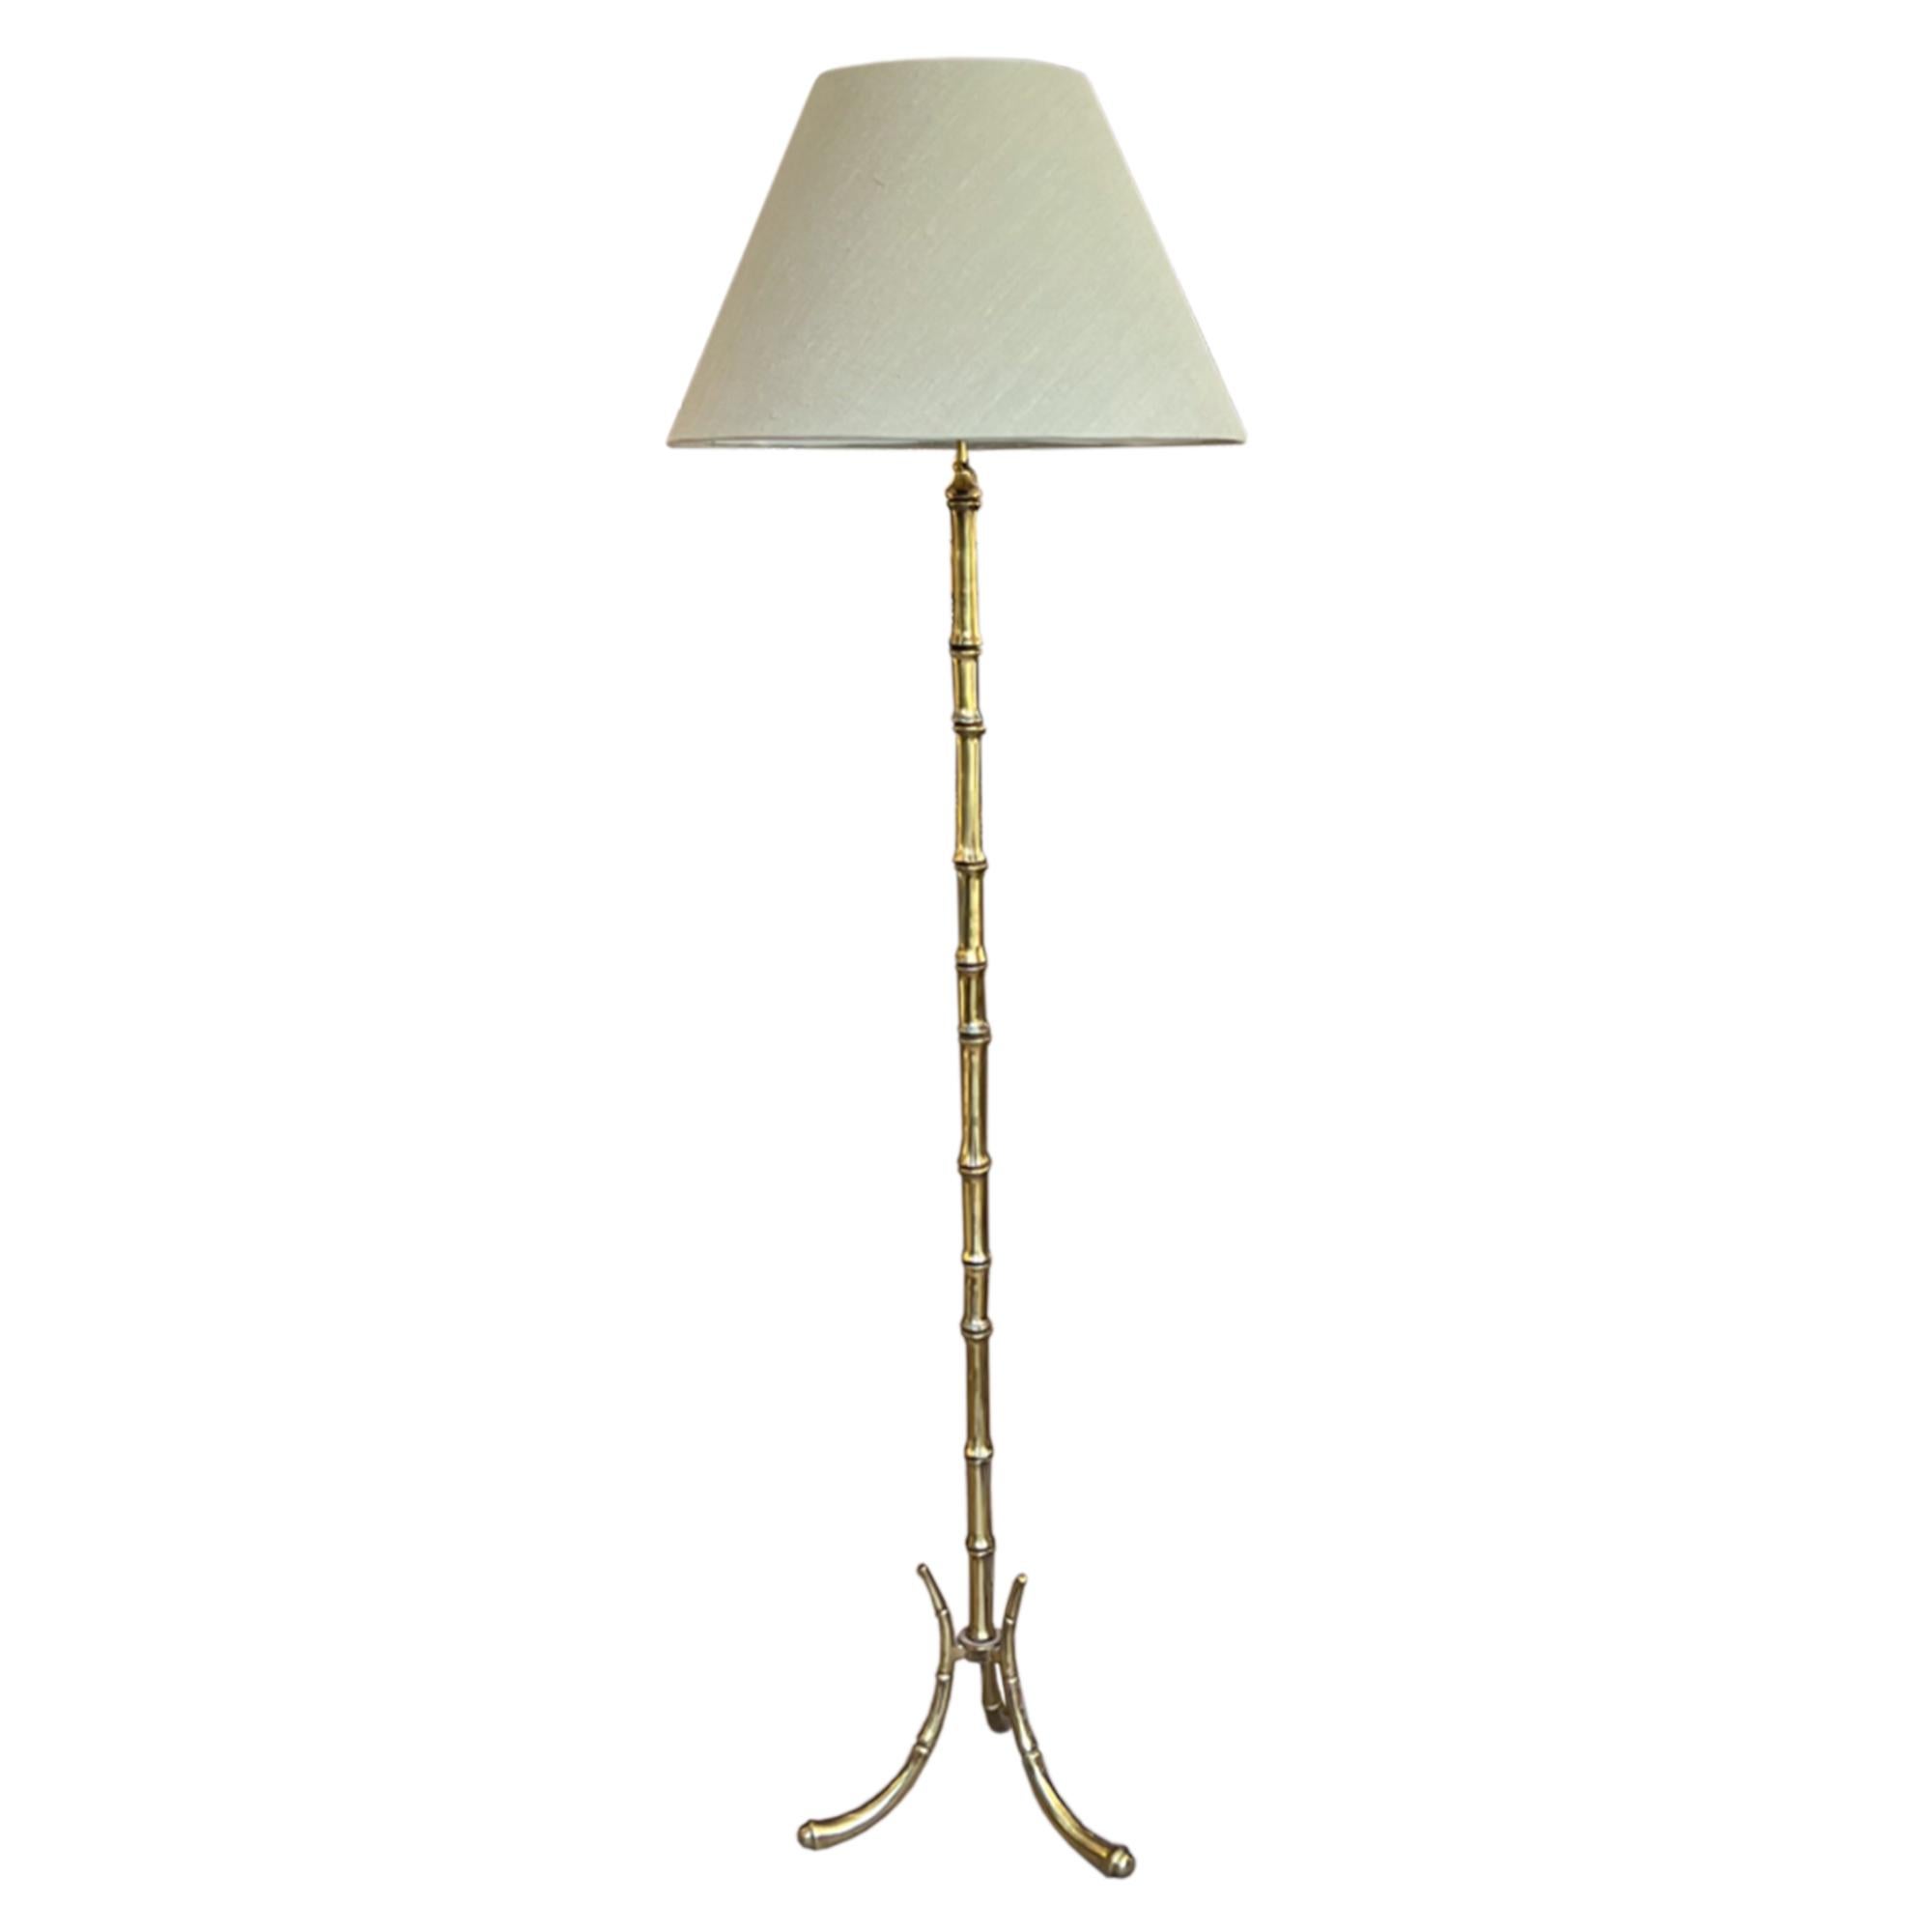 This is a great pair of brass midcentury floor lamps - exceptional quality and made in the style of Maison Baguès 

Made in France they are elegant, as well as being solid and sturdy. 

We've had them rewired by our electrician for the UK with